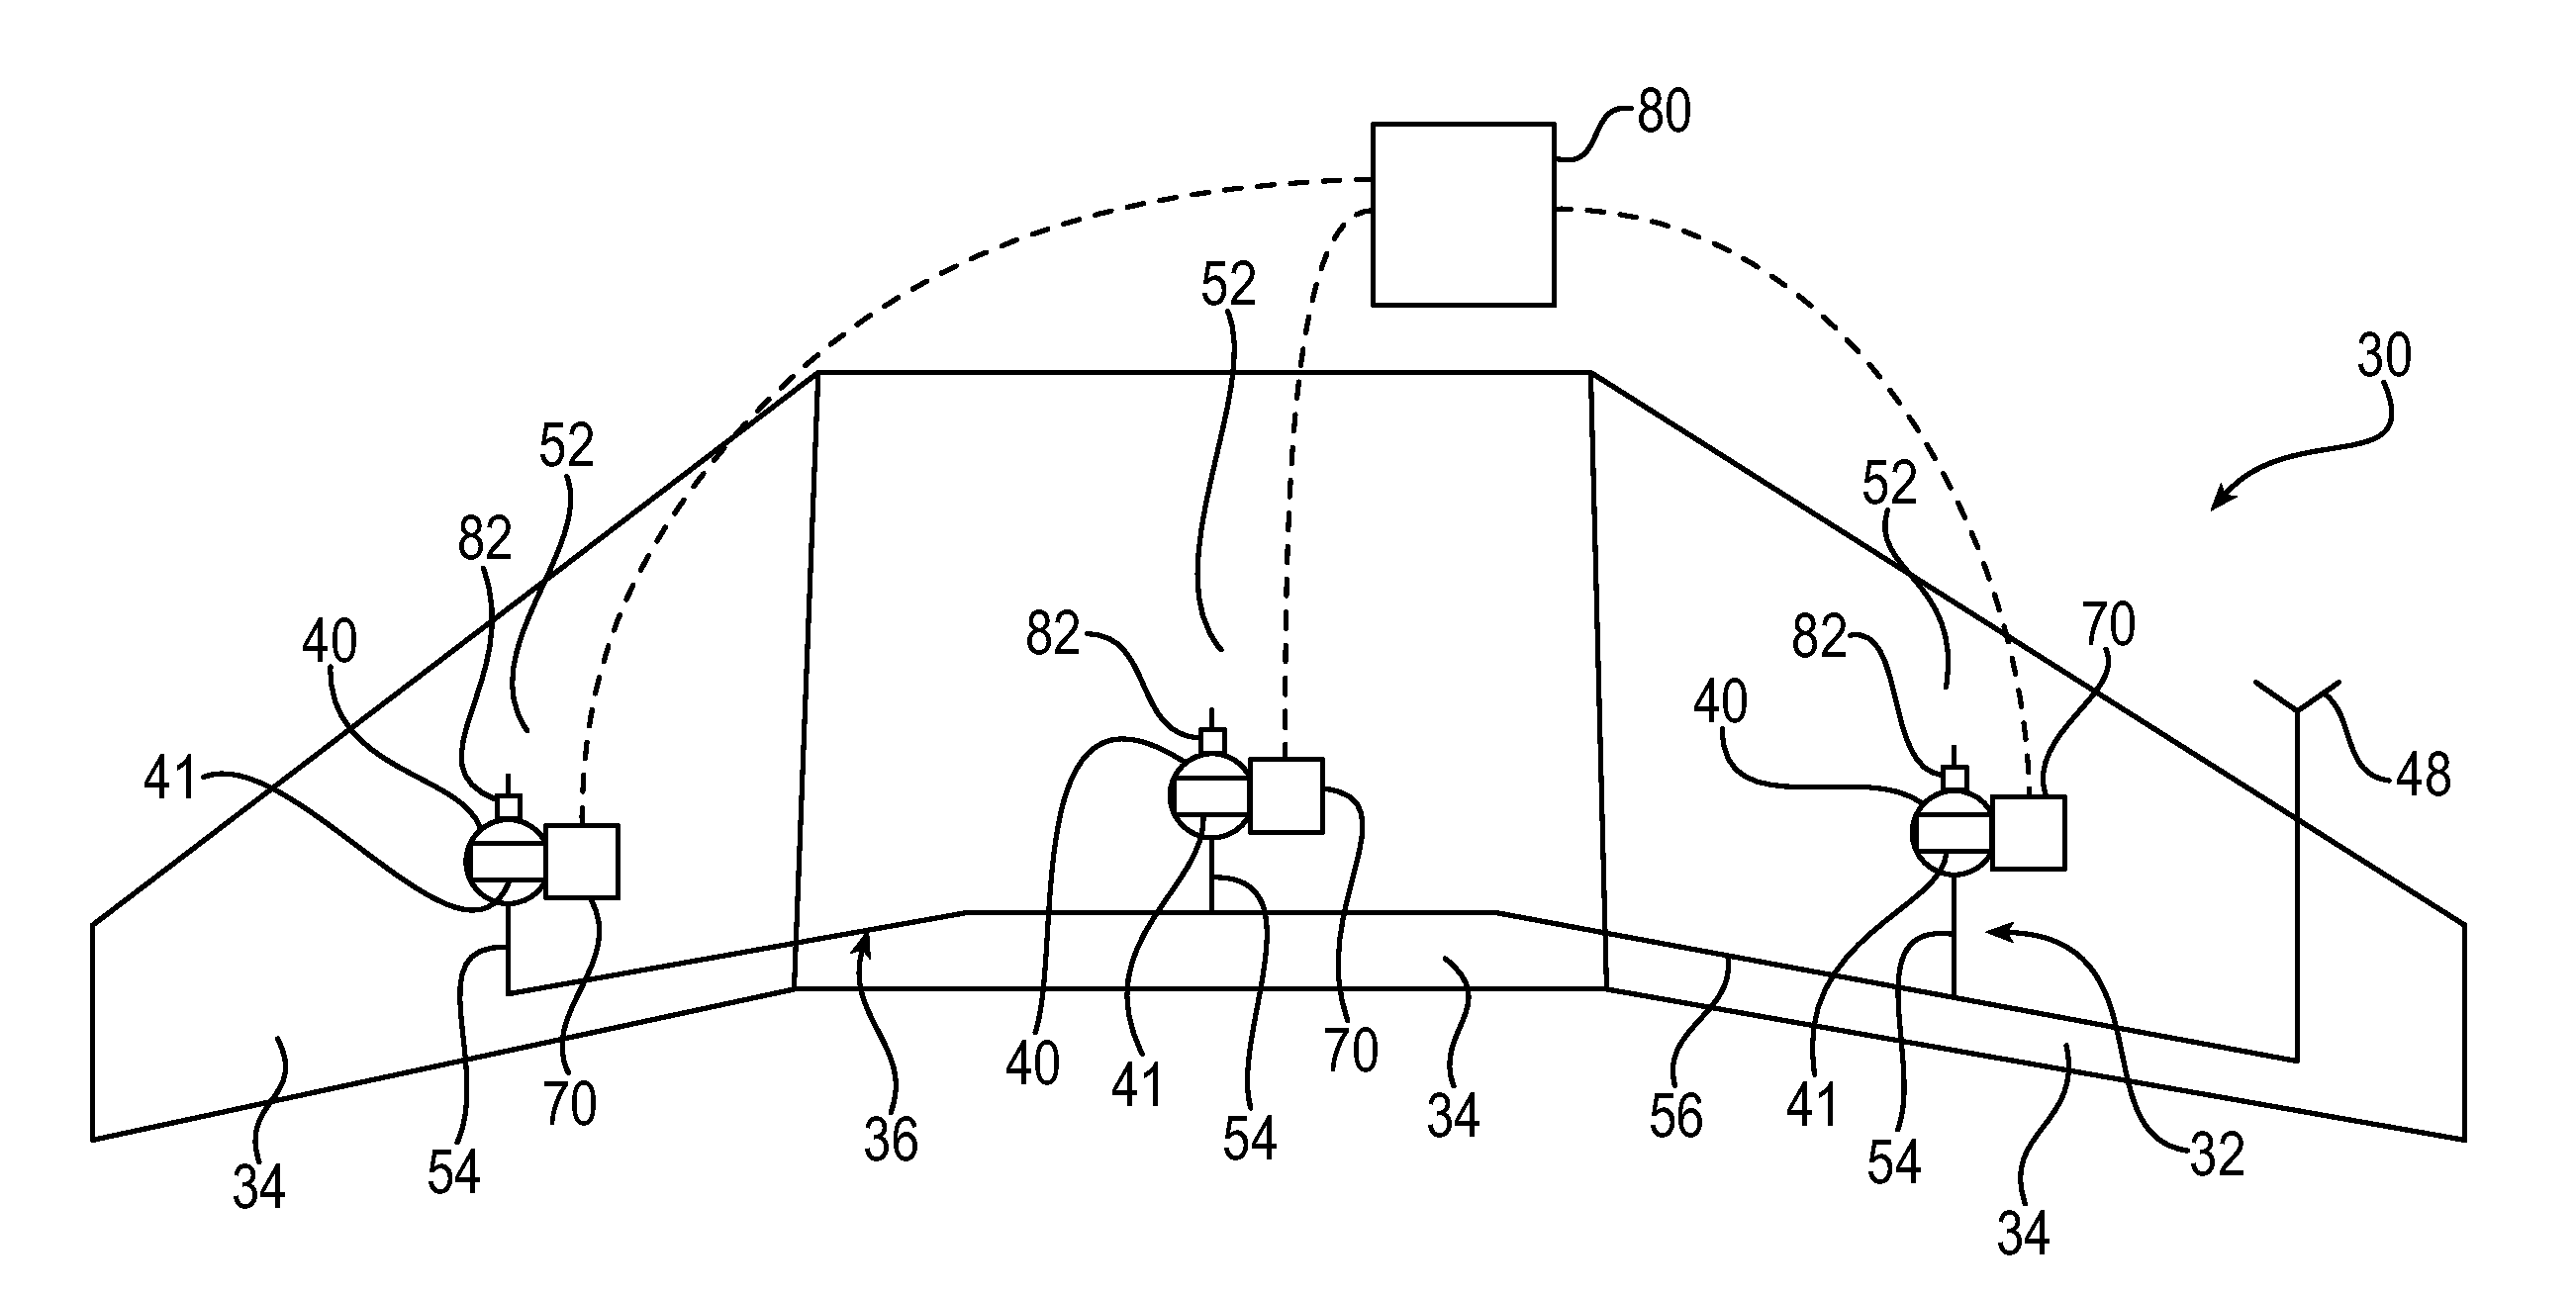 Piezoelectrically-controlled fuel delivery system